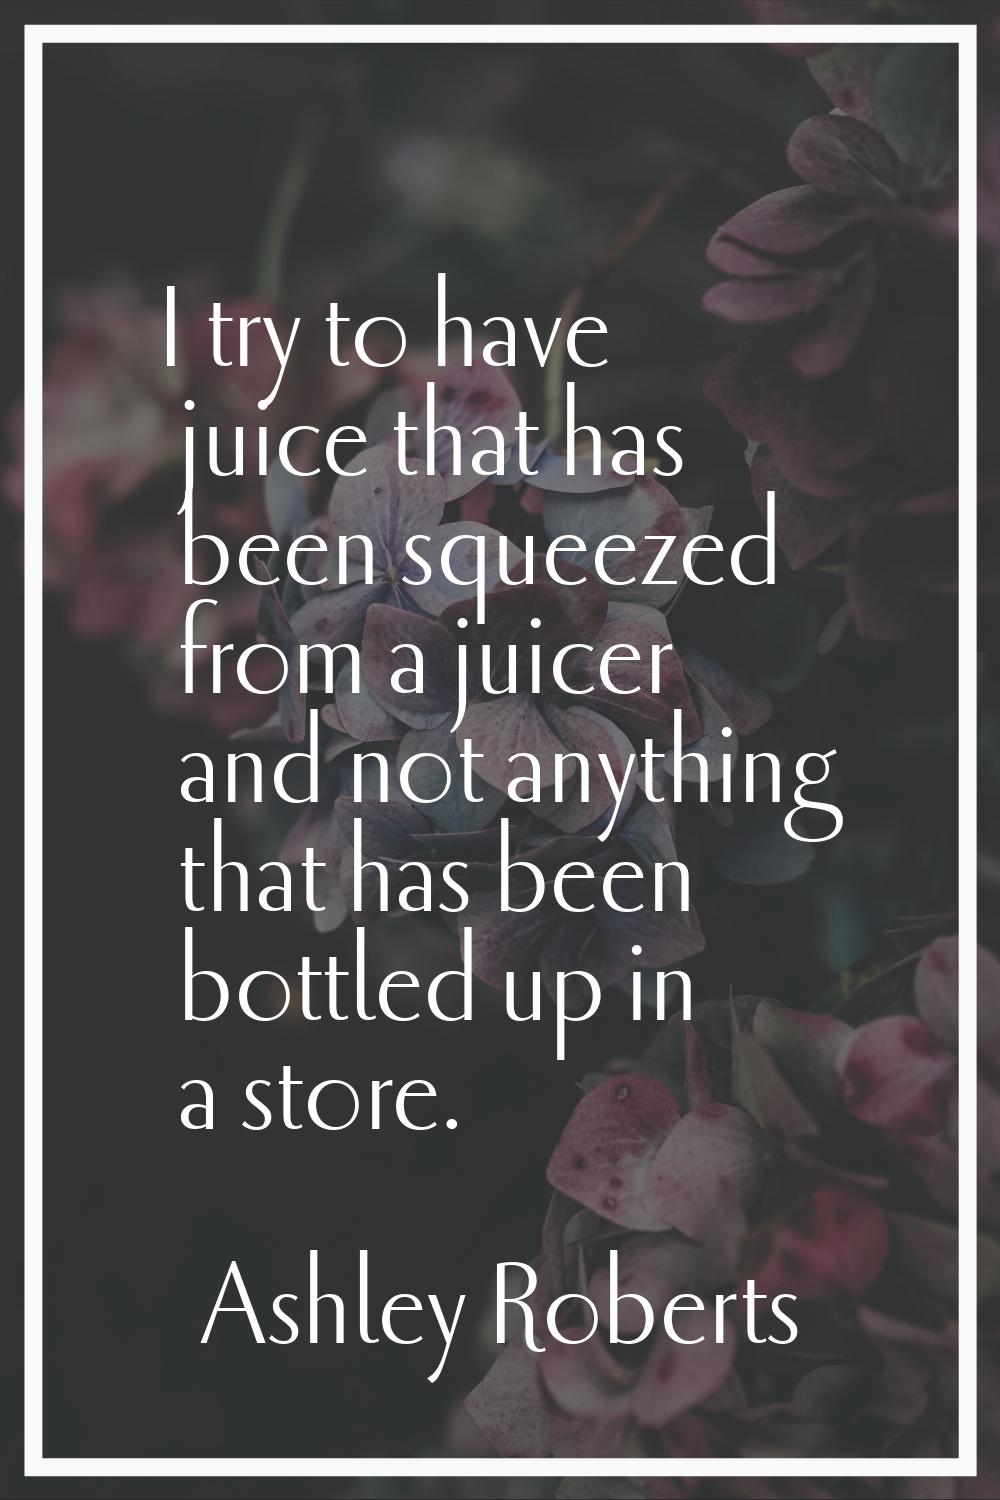 I try to have juice that has been squeezed from a juicer and not anything that has been bottled up 